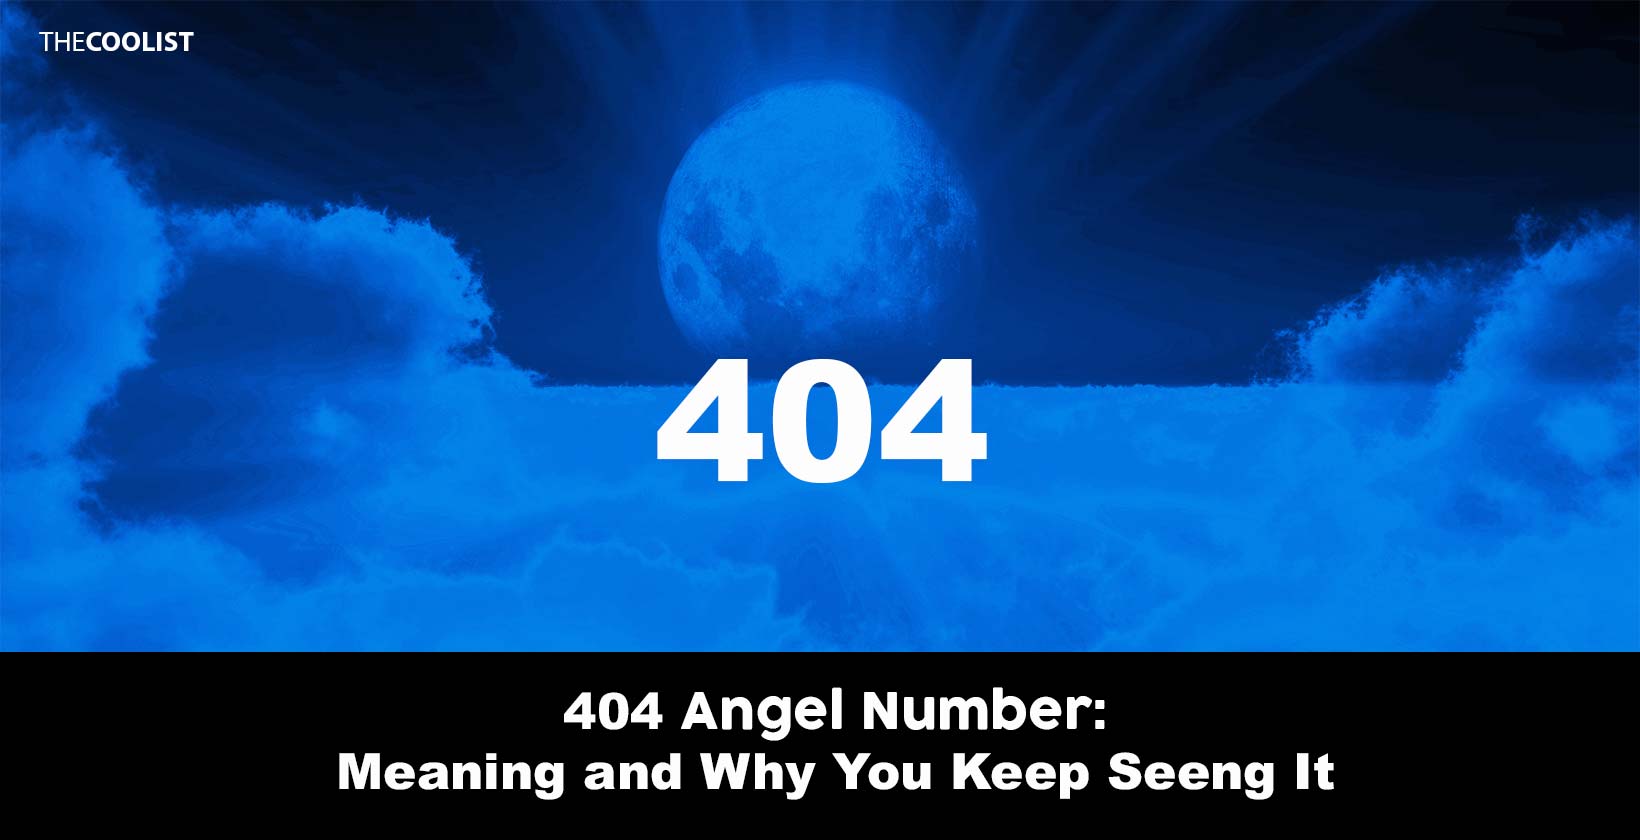 How 404 Angel Number Guides Life Paths